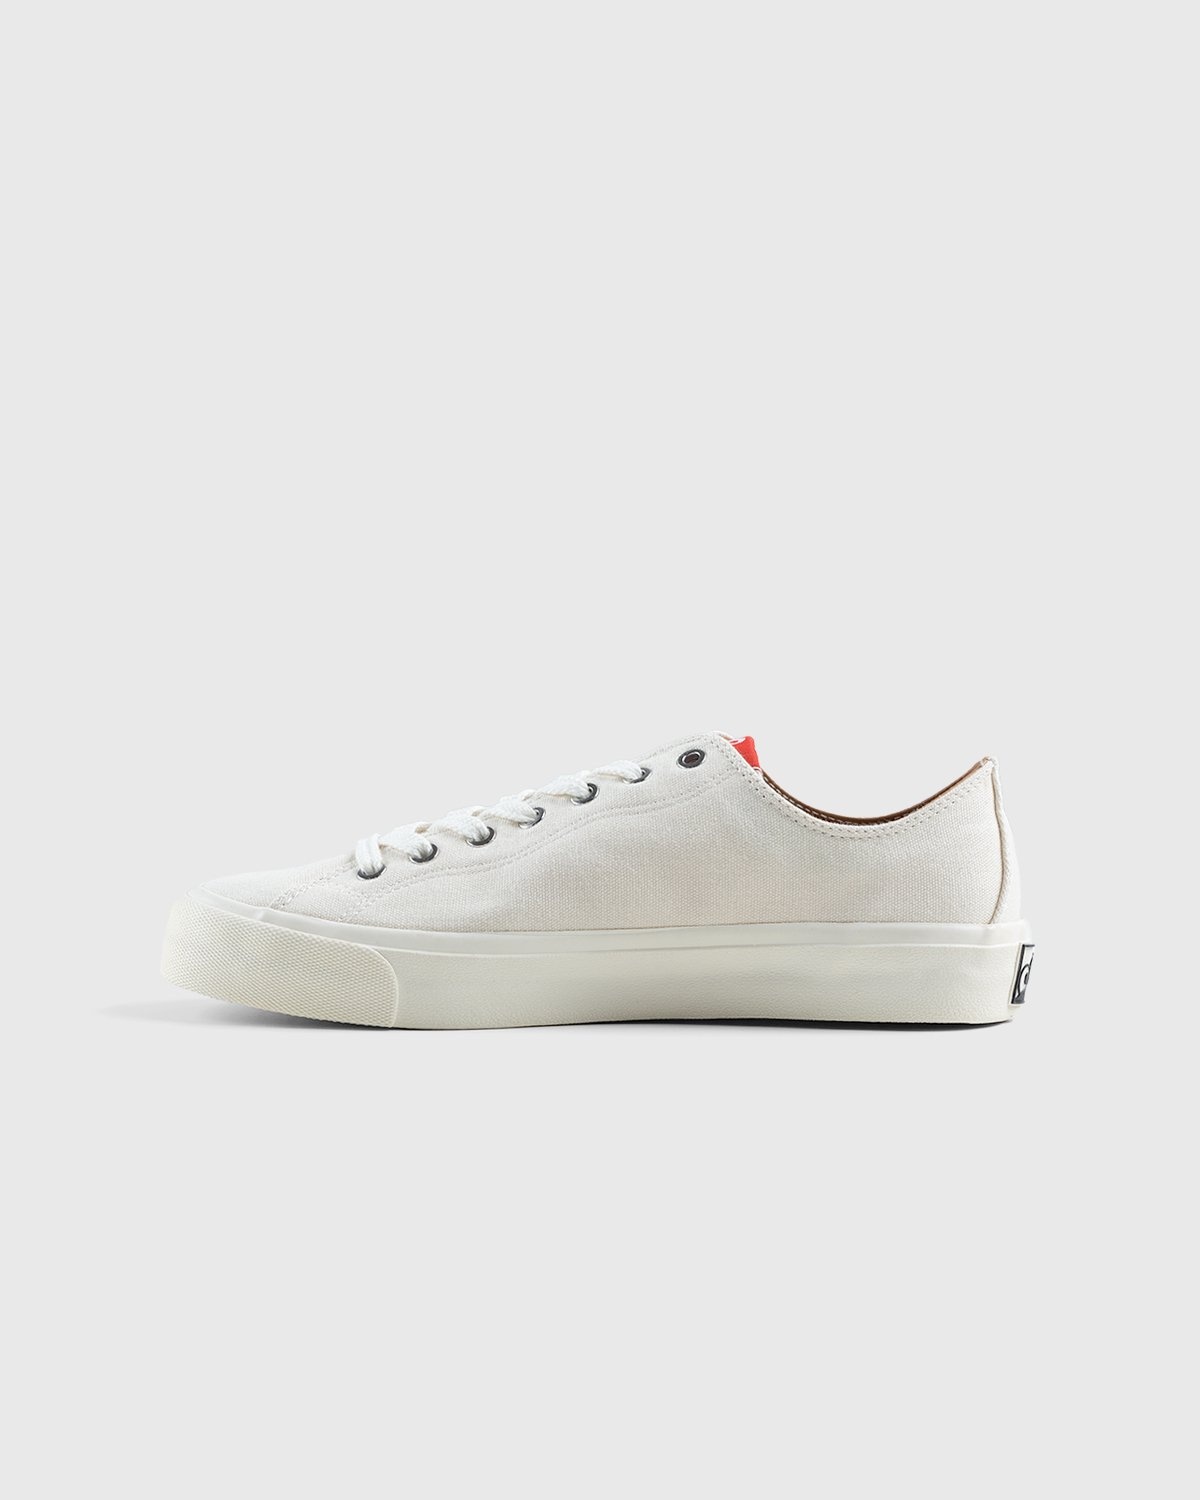 Last Resort AB – VM003 Canvas Lo White/White - Low Top Sneakers - White - Image 2